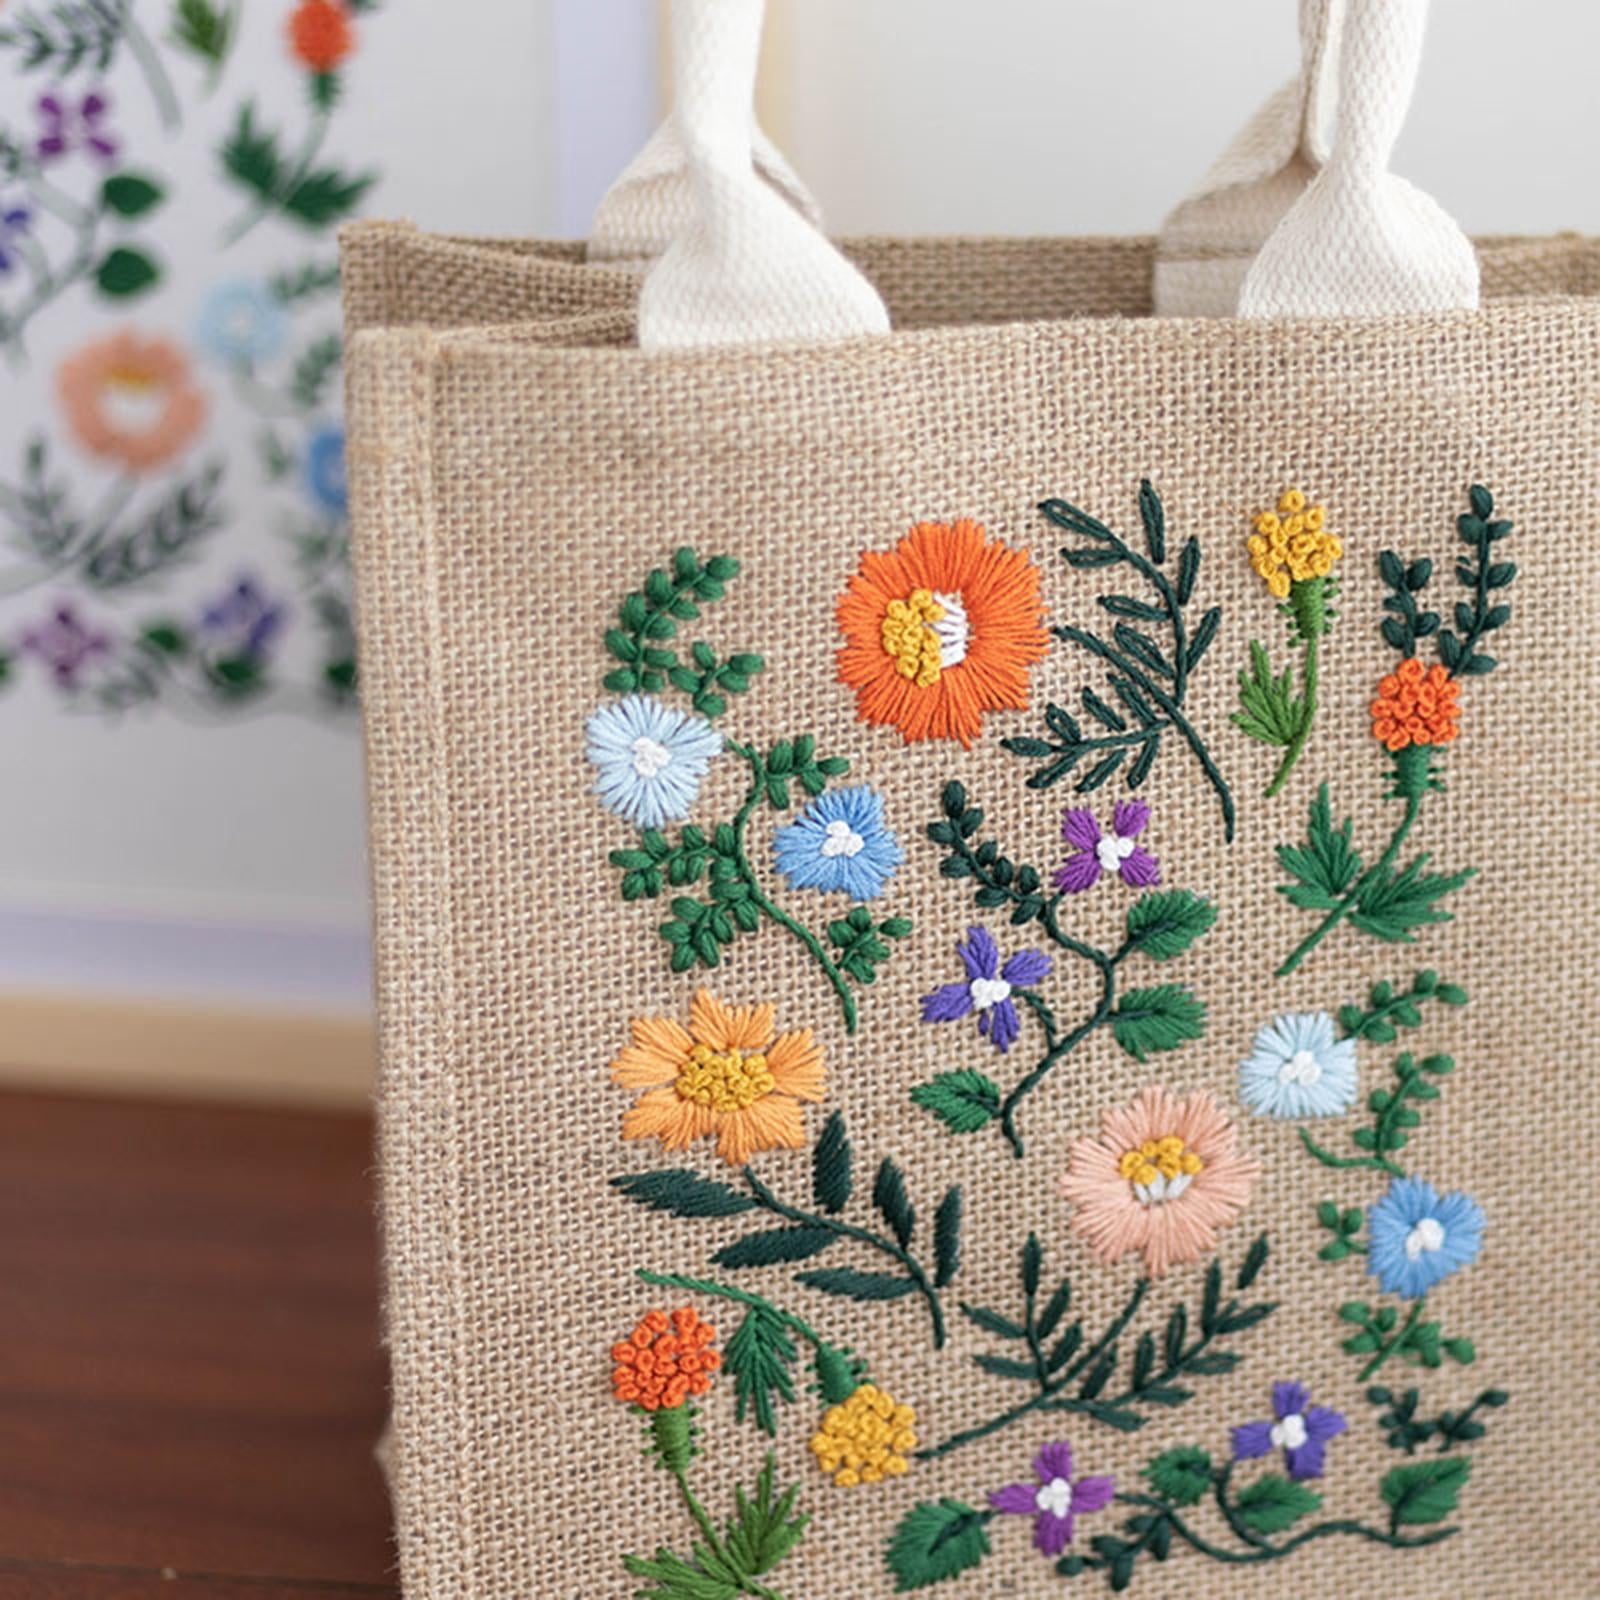 DIY Dotty Tote Bags | What Can We Do With Paper And Glue